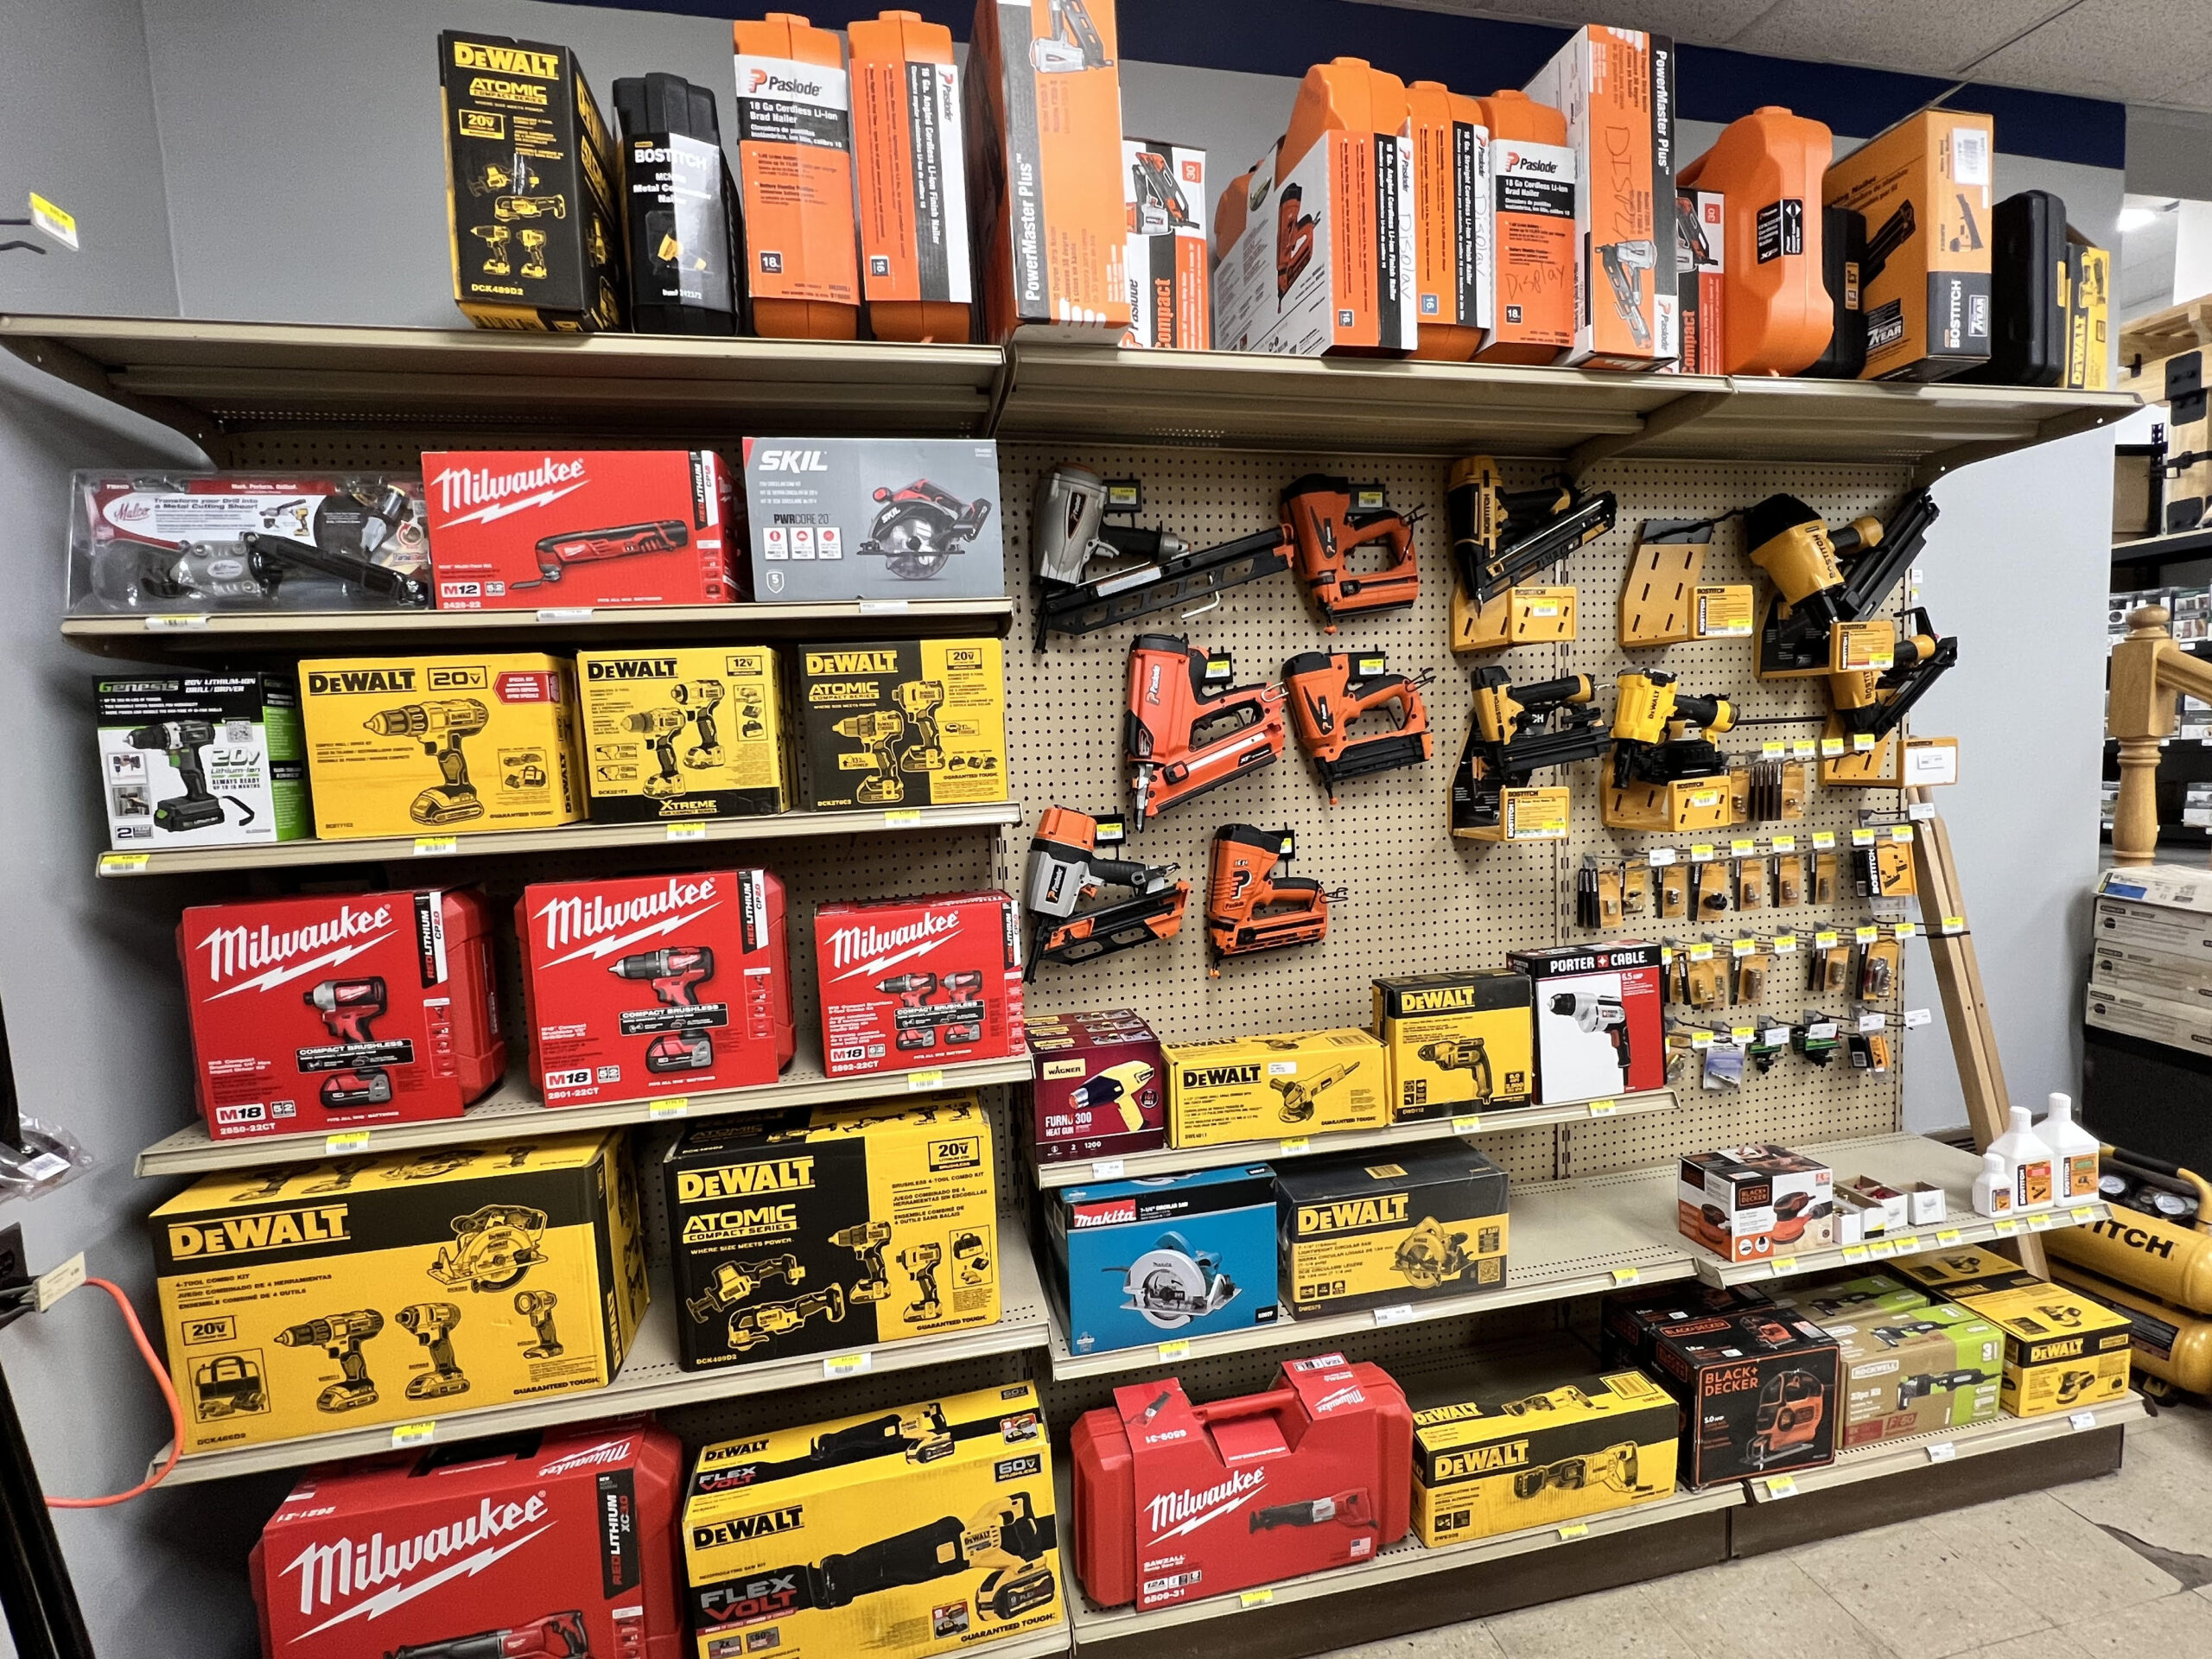 Assortment of DeWalt and Milwaukee products